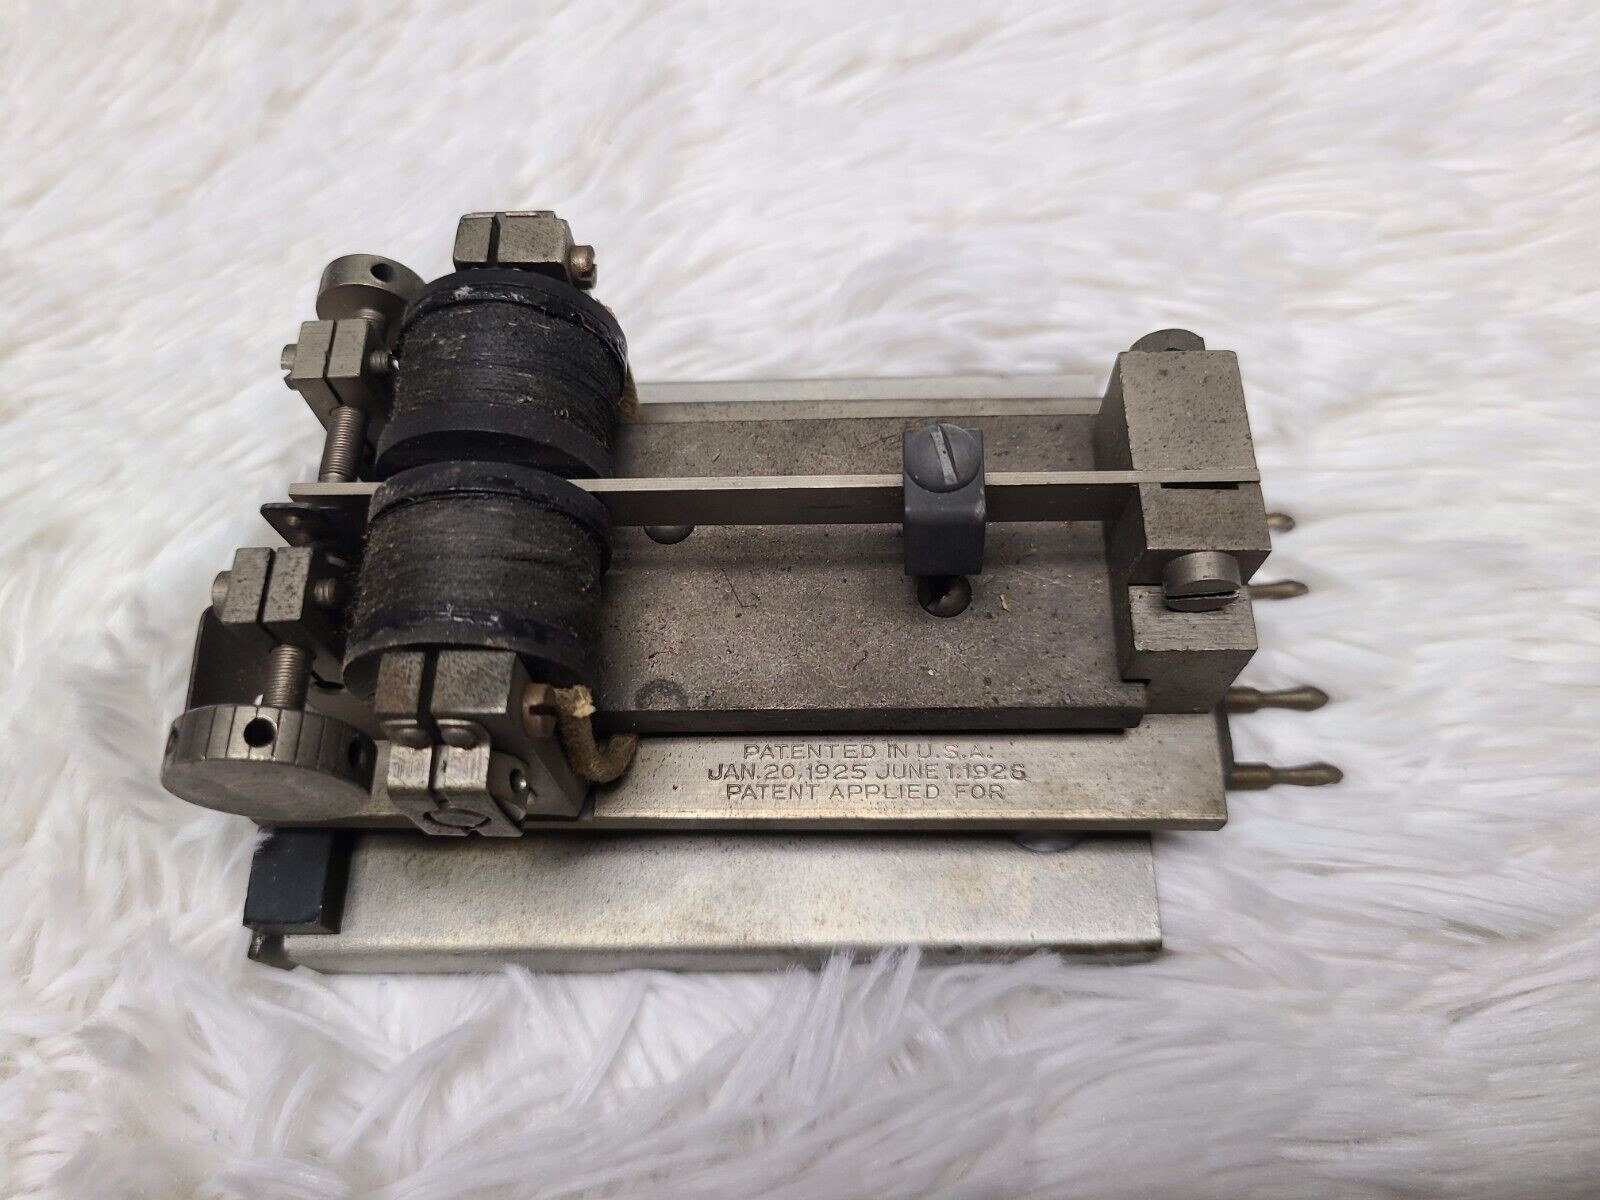 Vintage Antique 1925-26 US Patented Telegraph Sounder Relay Switch Device 218B